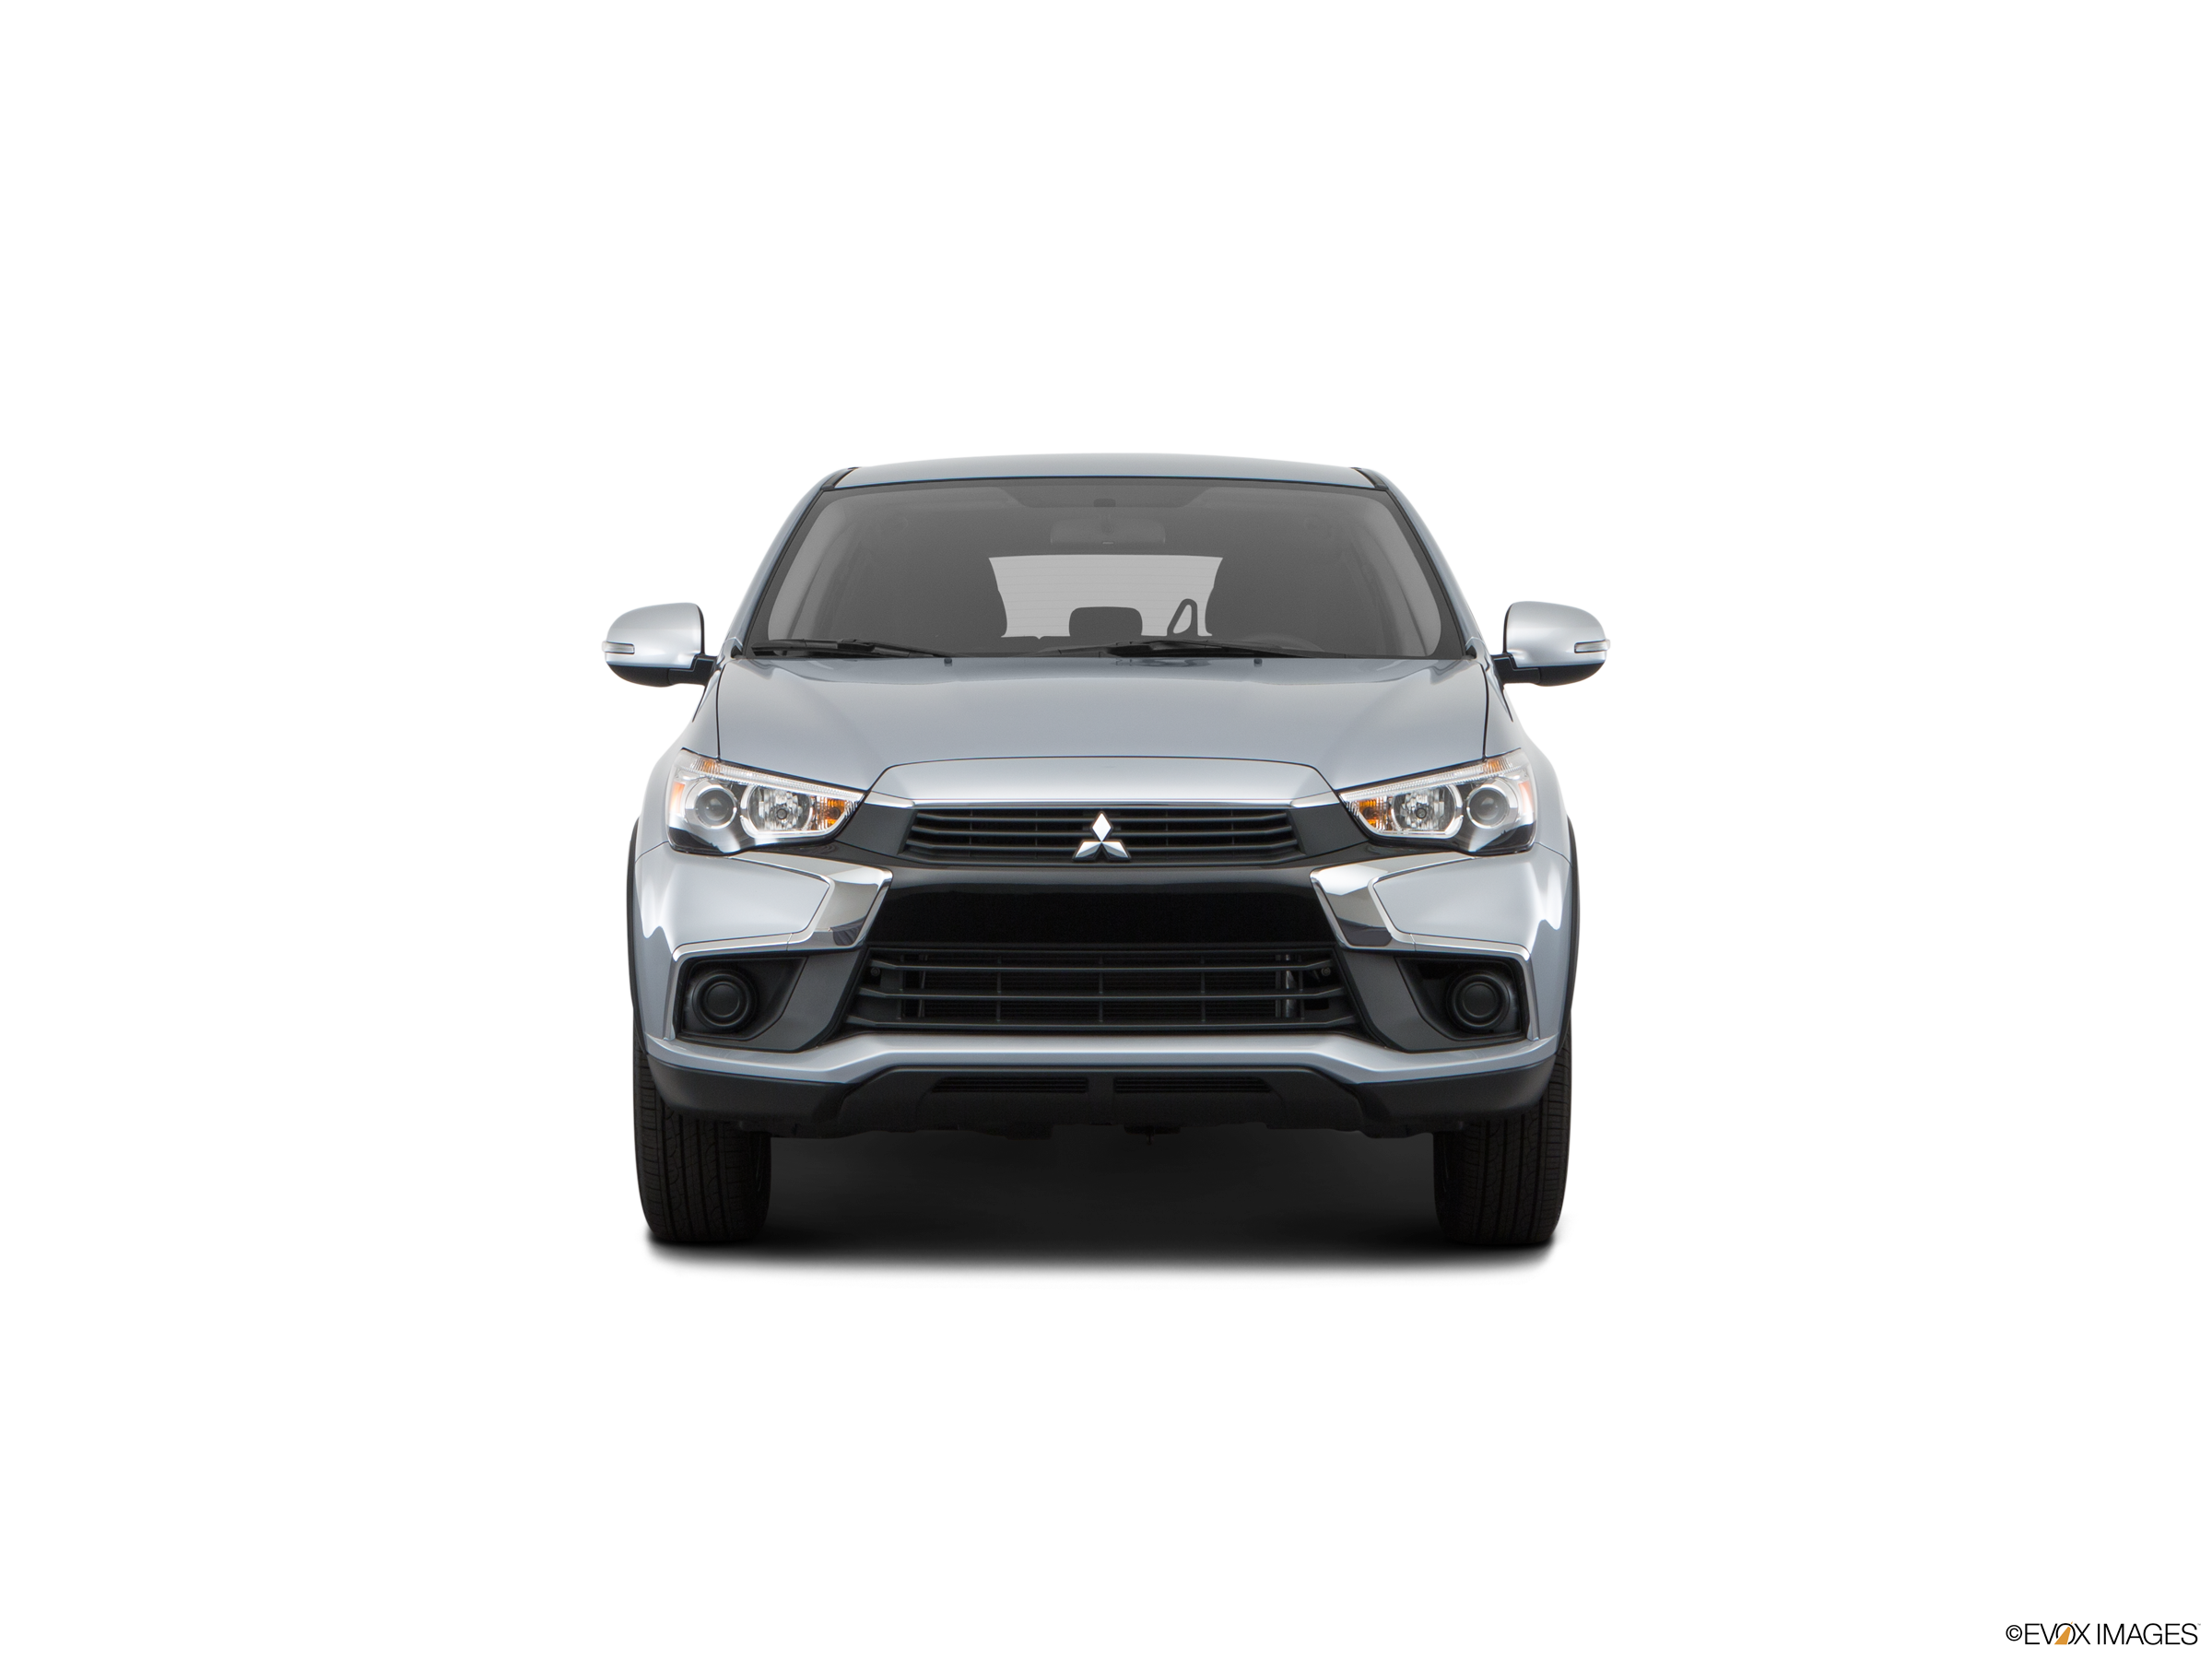 2016 Mitsubishi Outlander Sport Prices, Reviews, and Photos - MotorTrend